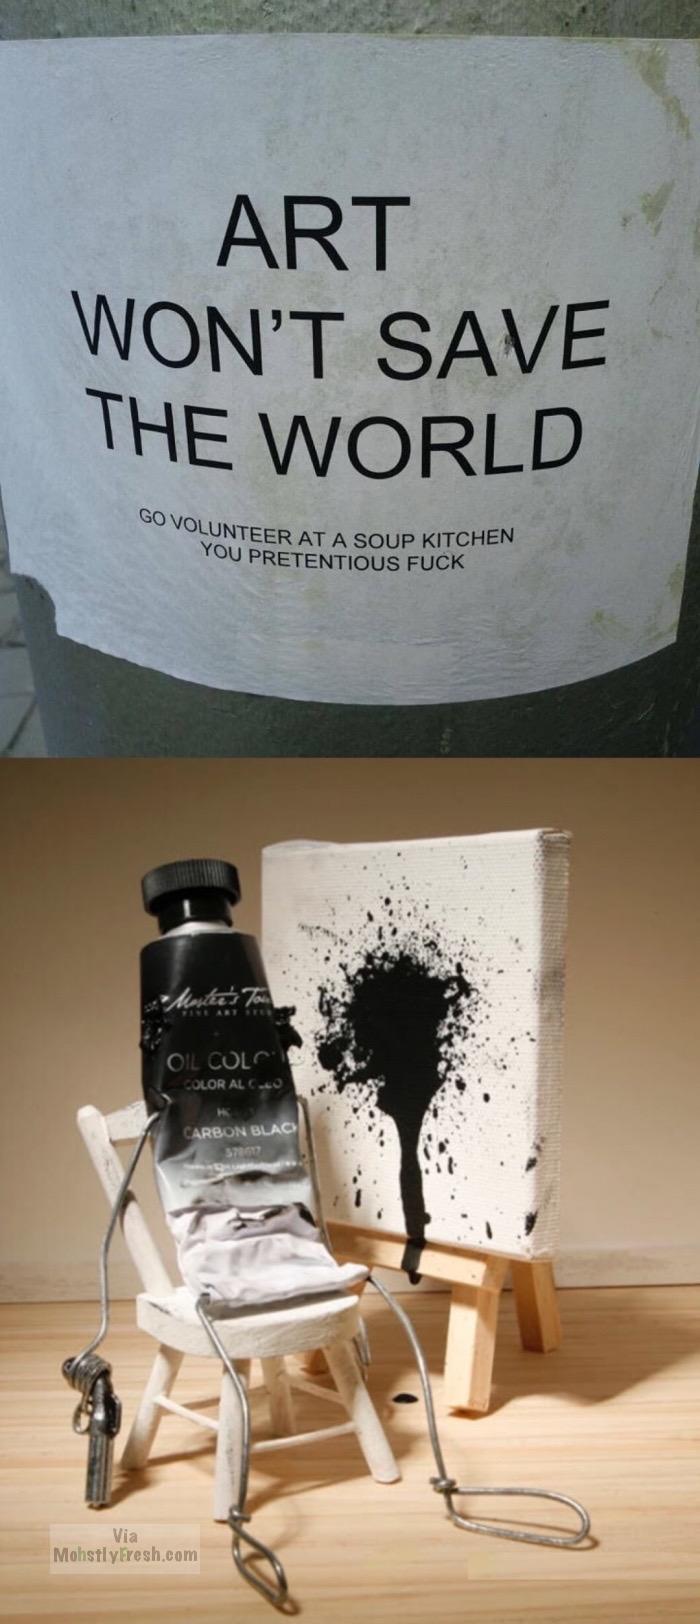 Art Won'T Save The World Go Volunteer At Unteer At A Soup Kitchen You Pretentious Fuck Wibe to Oil Colc Color Alco Carbon Blac 5786 Via Mohstly Fresh.com